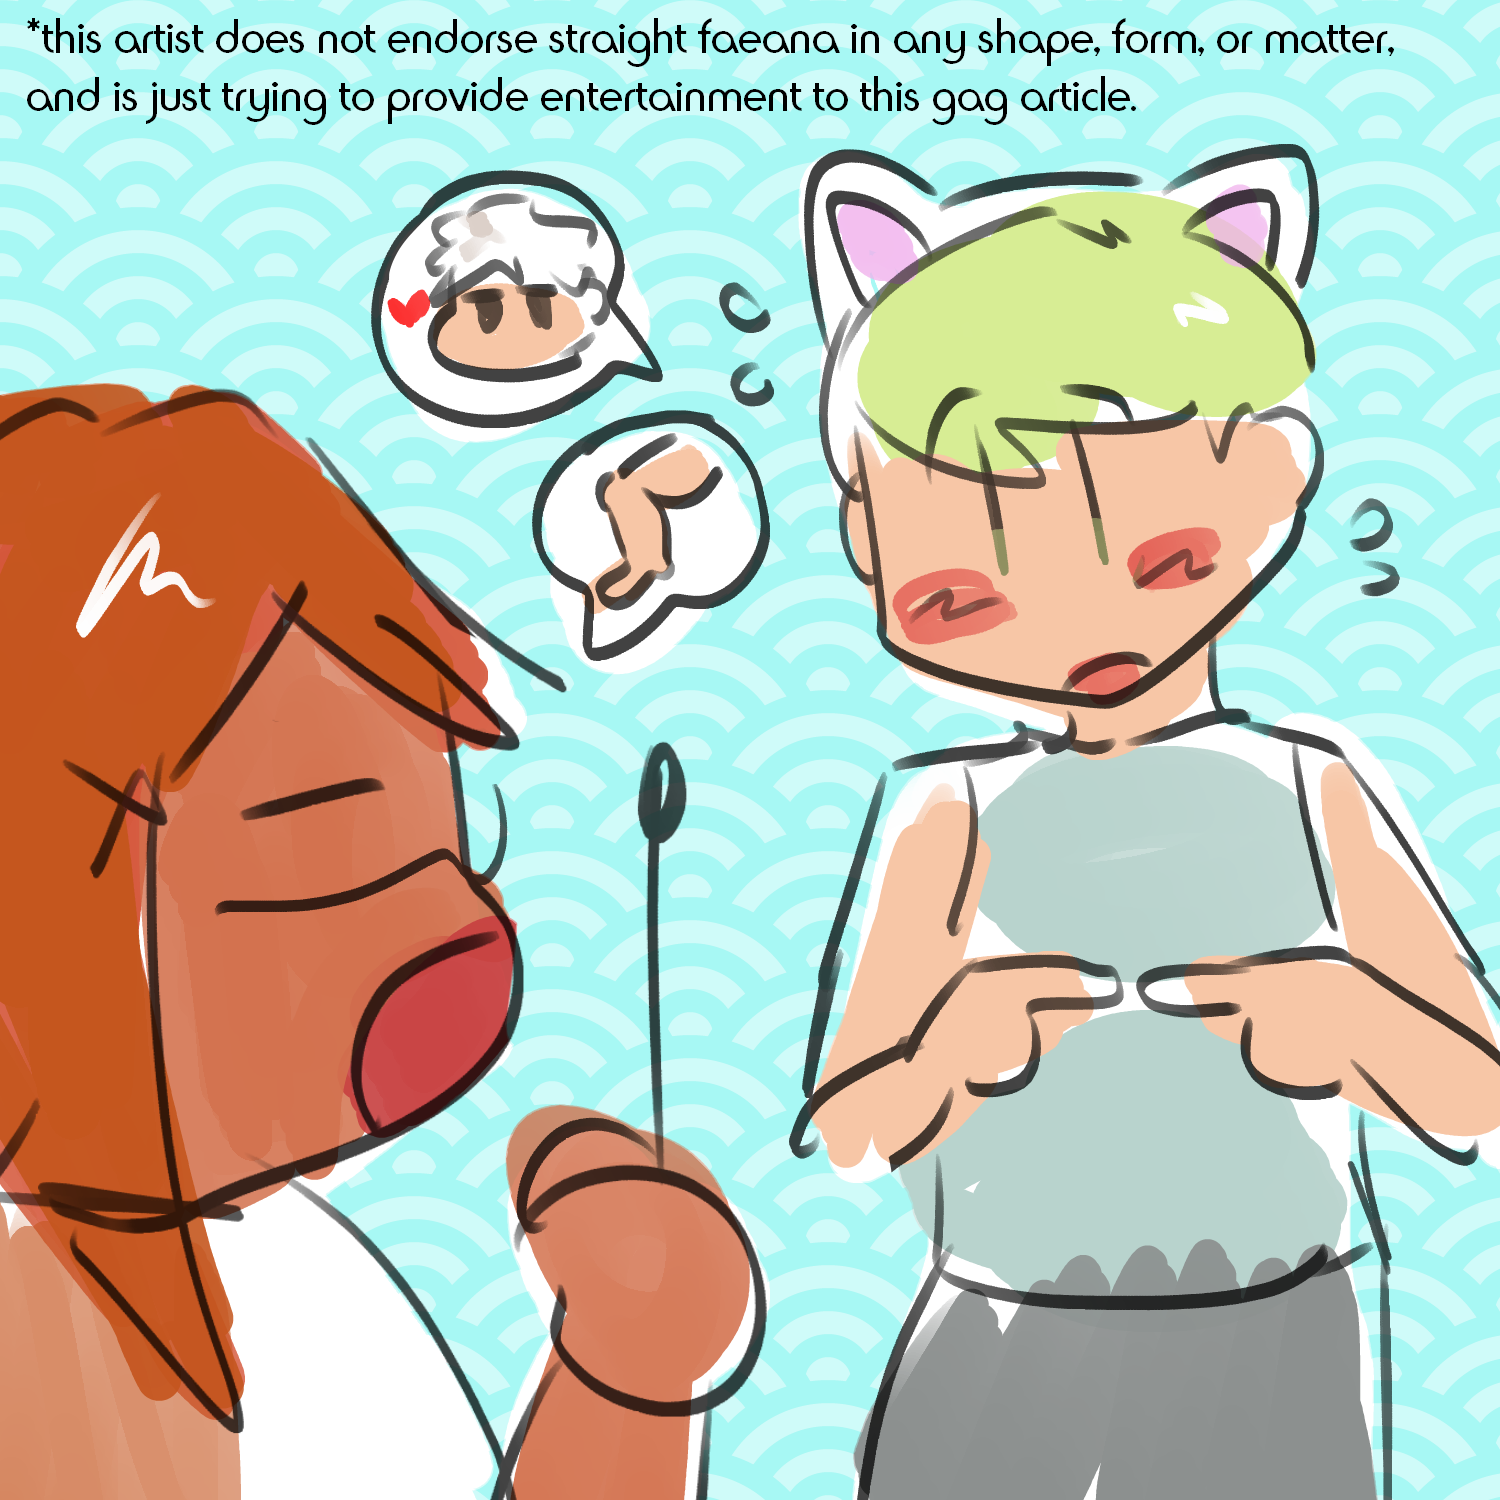 drawing of faeana in aforementioned outfit touching her fingers together shyly while talking about darius and a red heart. ms sharline seems to be lecturing her by talking about bare legs. the background is a light blue shell pattern, and there is a caption that says this artist does not endorse straight faeana in any shape, form, or matter. and is just trying to provide entertainment to this gag article.